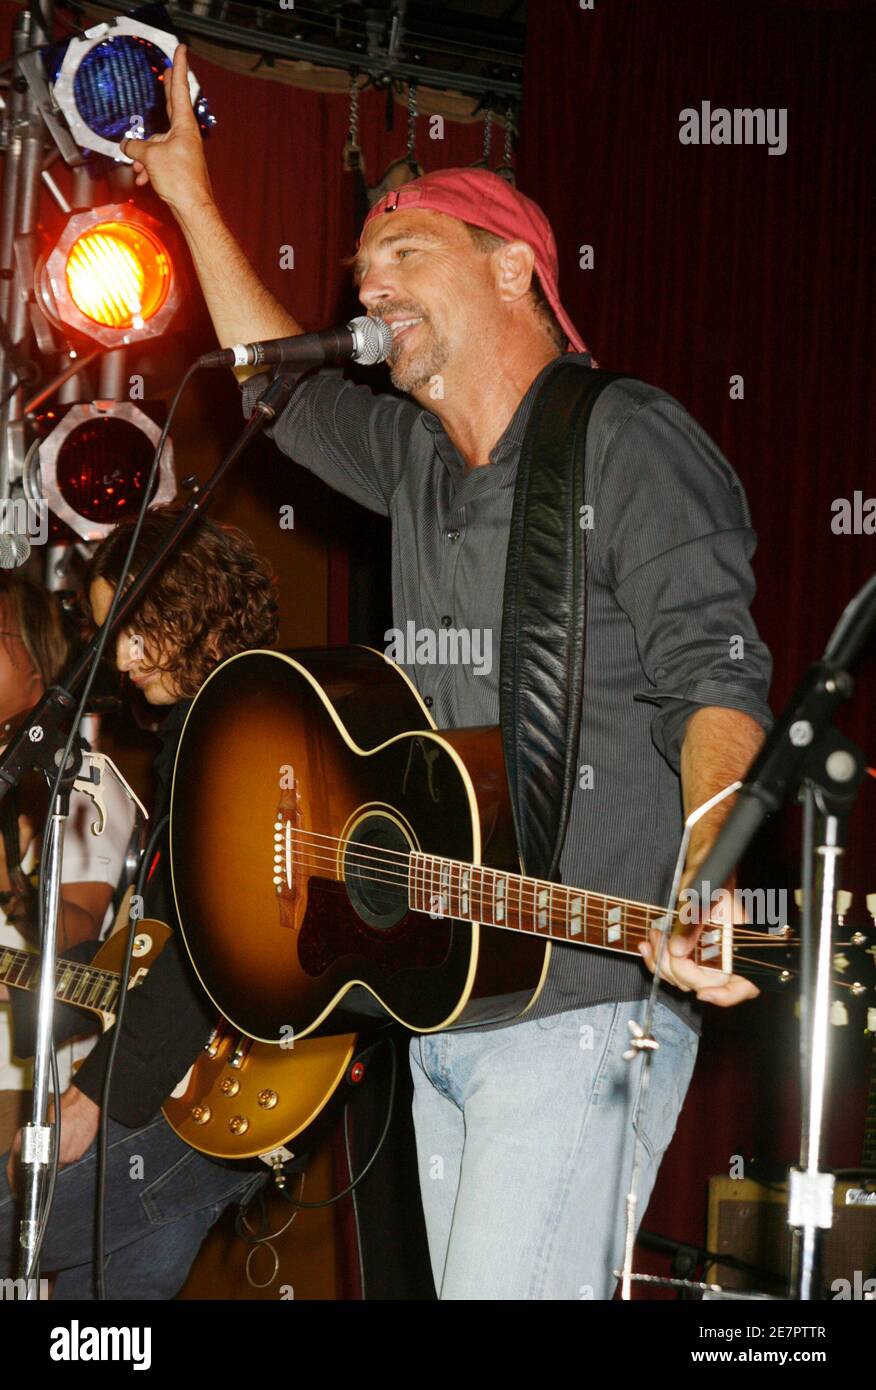 Actor Kevin Costner, star of the film 'Swing Vote' plays with his band 'Modern West' at the party following the film's premiere in Hollywood, California  July 24, 2008.  REUTERS/Fred Prouser           (UNITED STATES) Stock Photo